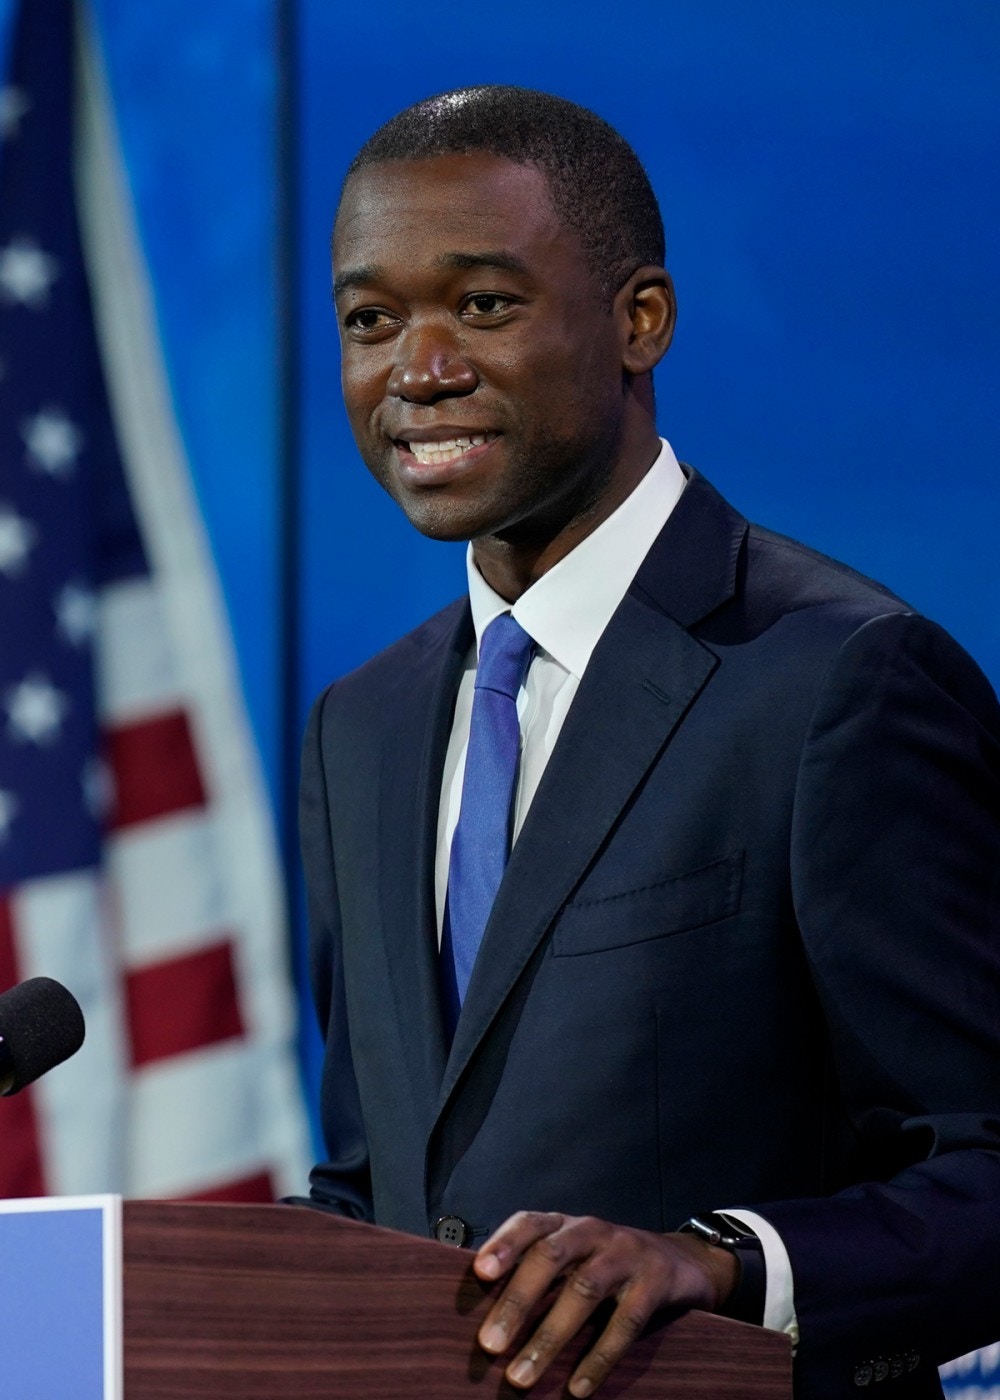 Wally Adeyemo who President-elect Joe Biden nominated to serve as Deputy Secretary of the Treasury speaks at The Queen theater, Tuesday, Dec. 1, 2020, in Wilmington, Del. (AP Photo/Andrew Harnik)